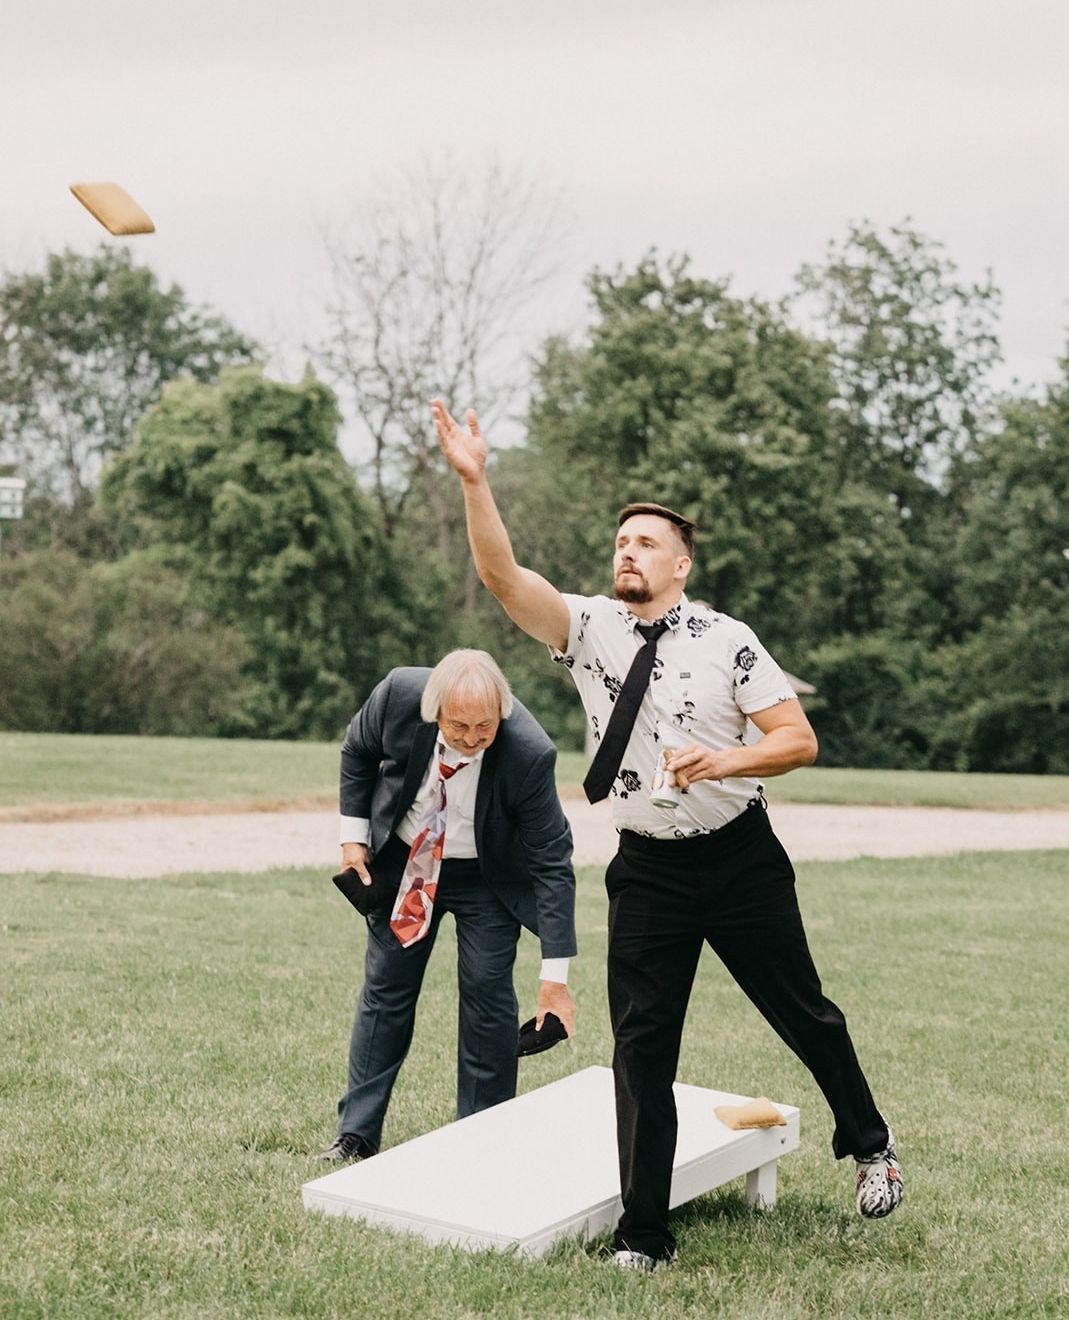 Give your guests something fun to do while enjoying cocktail hour! We have plenty of yard games like cornhole, giant jenga, giant connect four, etc. to keep your guests entertained before the reception kicks off!🎲🙌